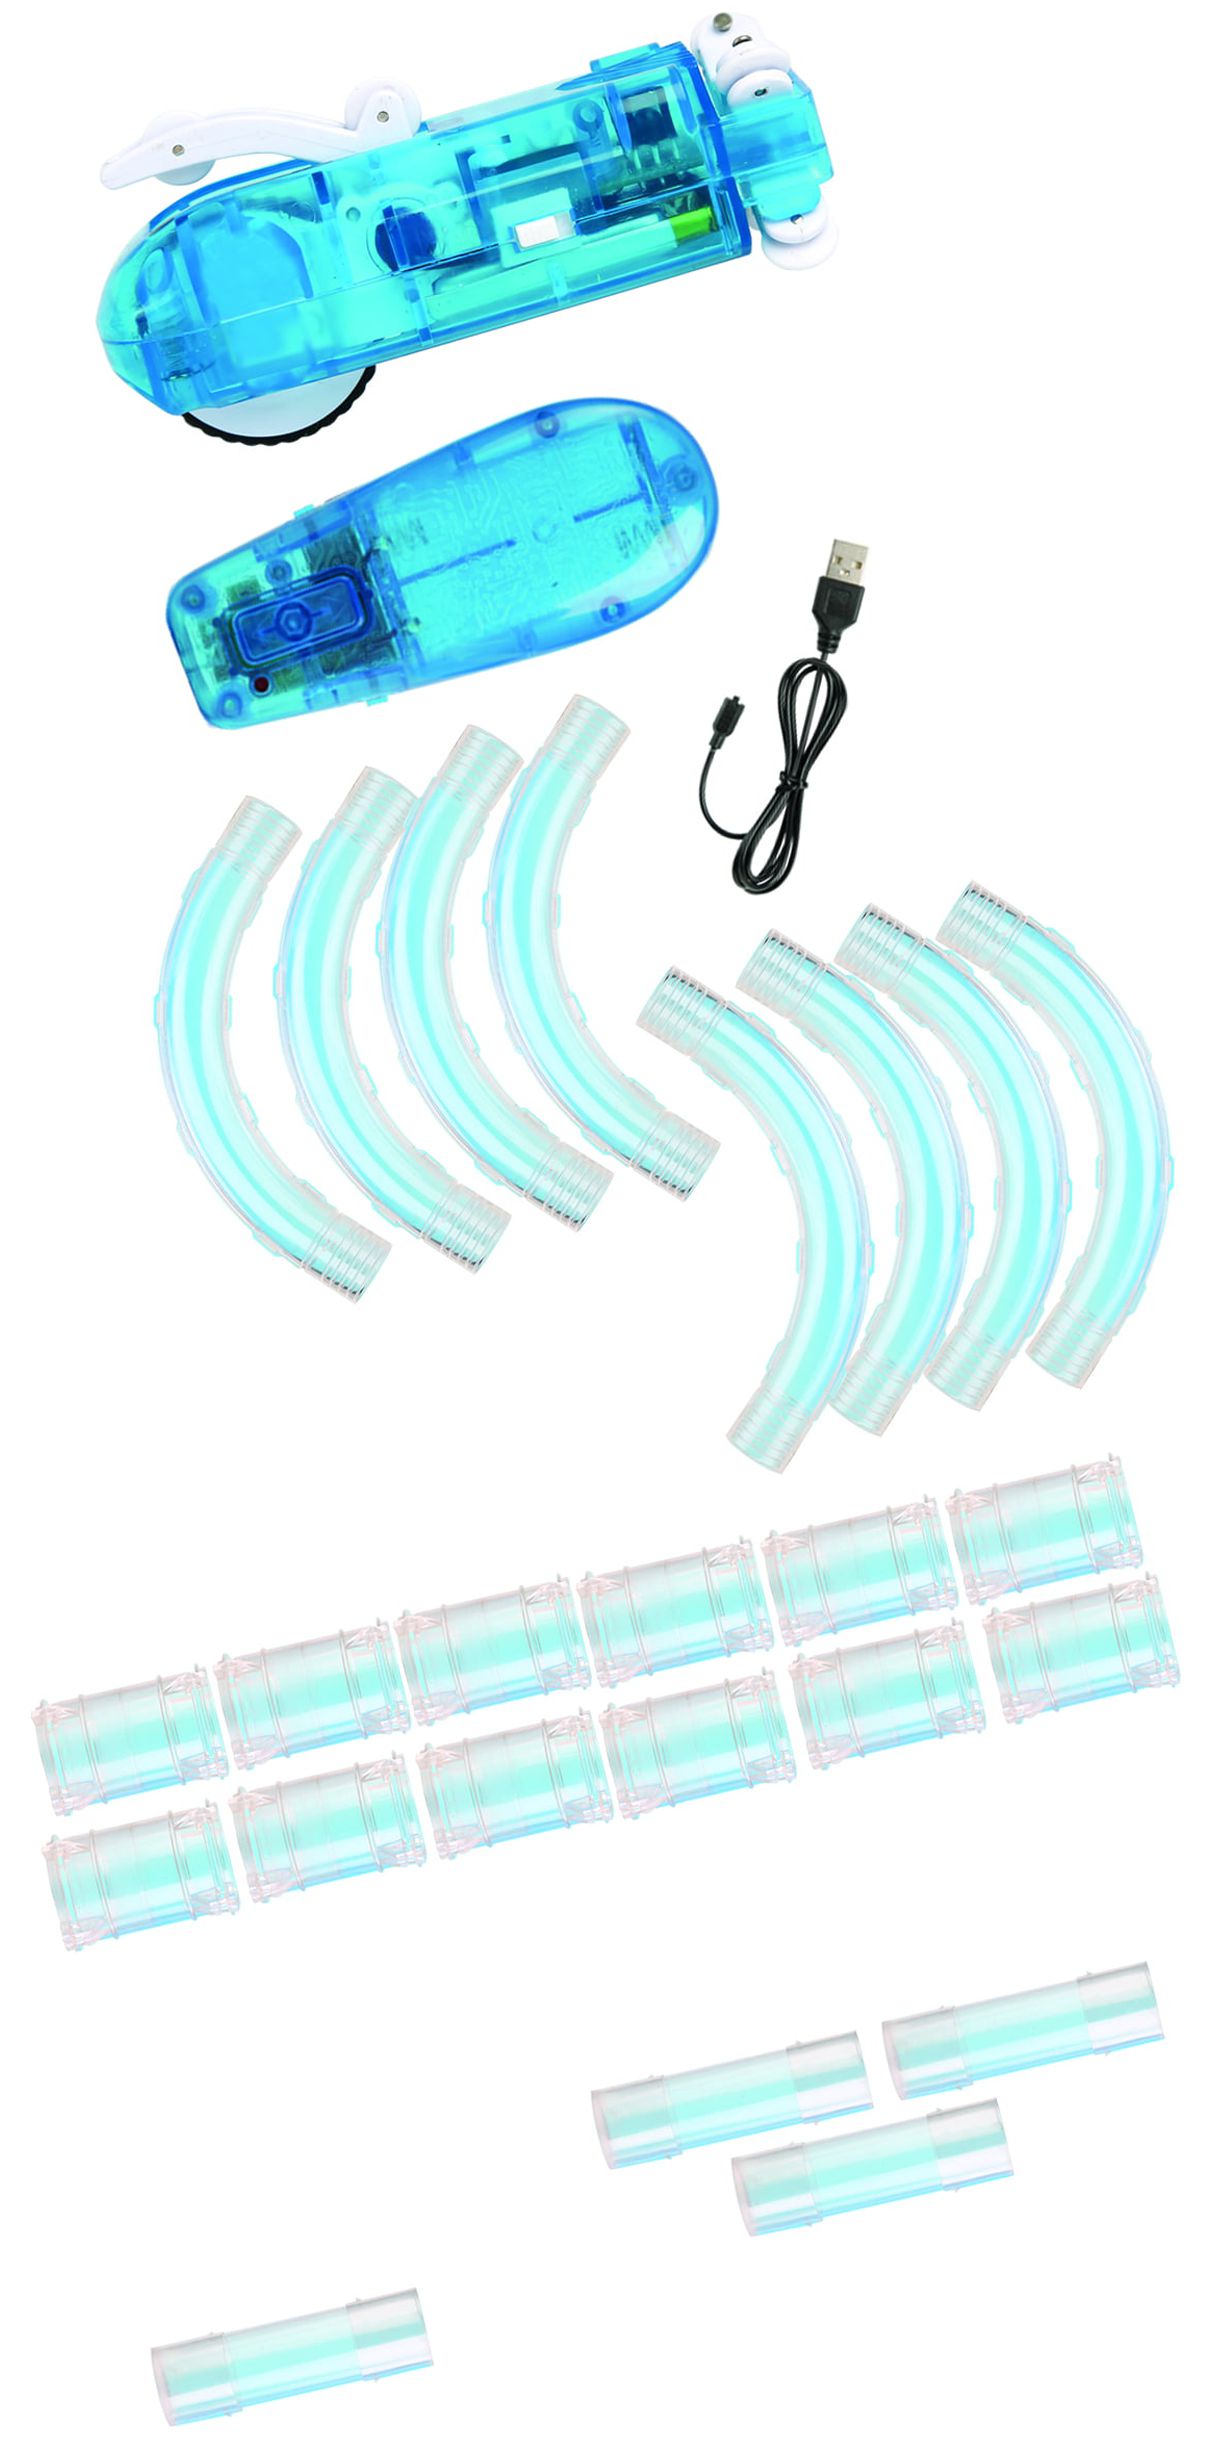 ZOOM TUBES CAR TRAX, 25-Pc RC Car Trax Set with 1 Blue Racer and Over 12ft of Tubes (As Seen on TV) - image 2 of 5